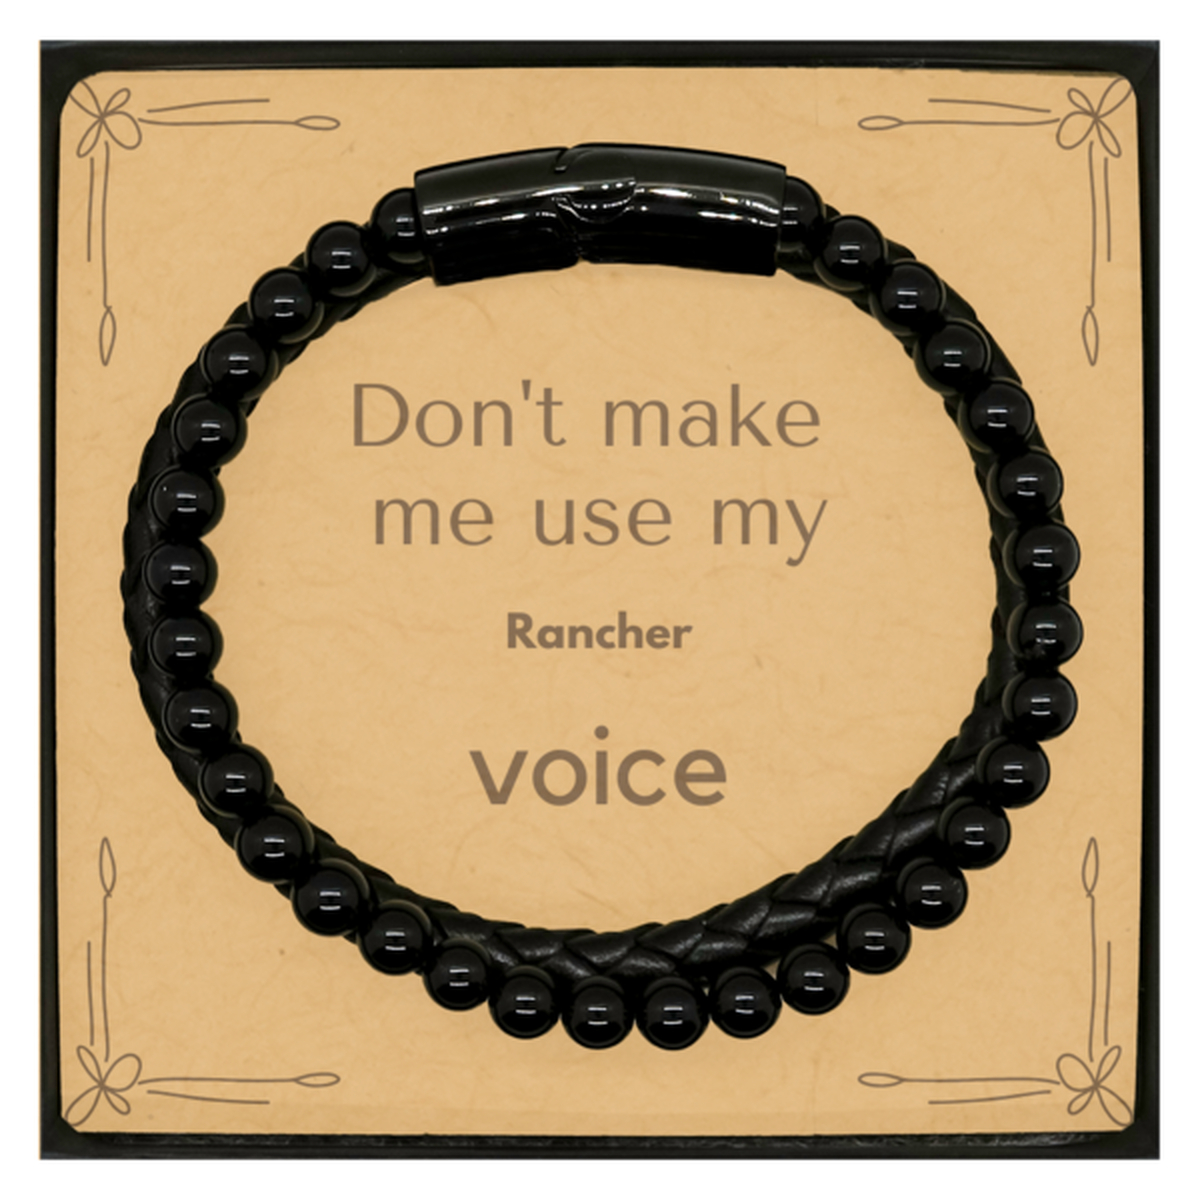 Don't make me use my Rancher voice, Sarcasm Rancher Card Gifts, Christmas Rancher Stone Leather Bracelets Birthday Unique Gifts For Rancher Coworkers, Men, Women, Colleague, Friends